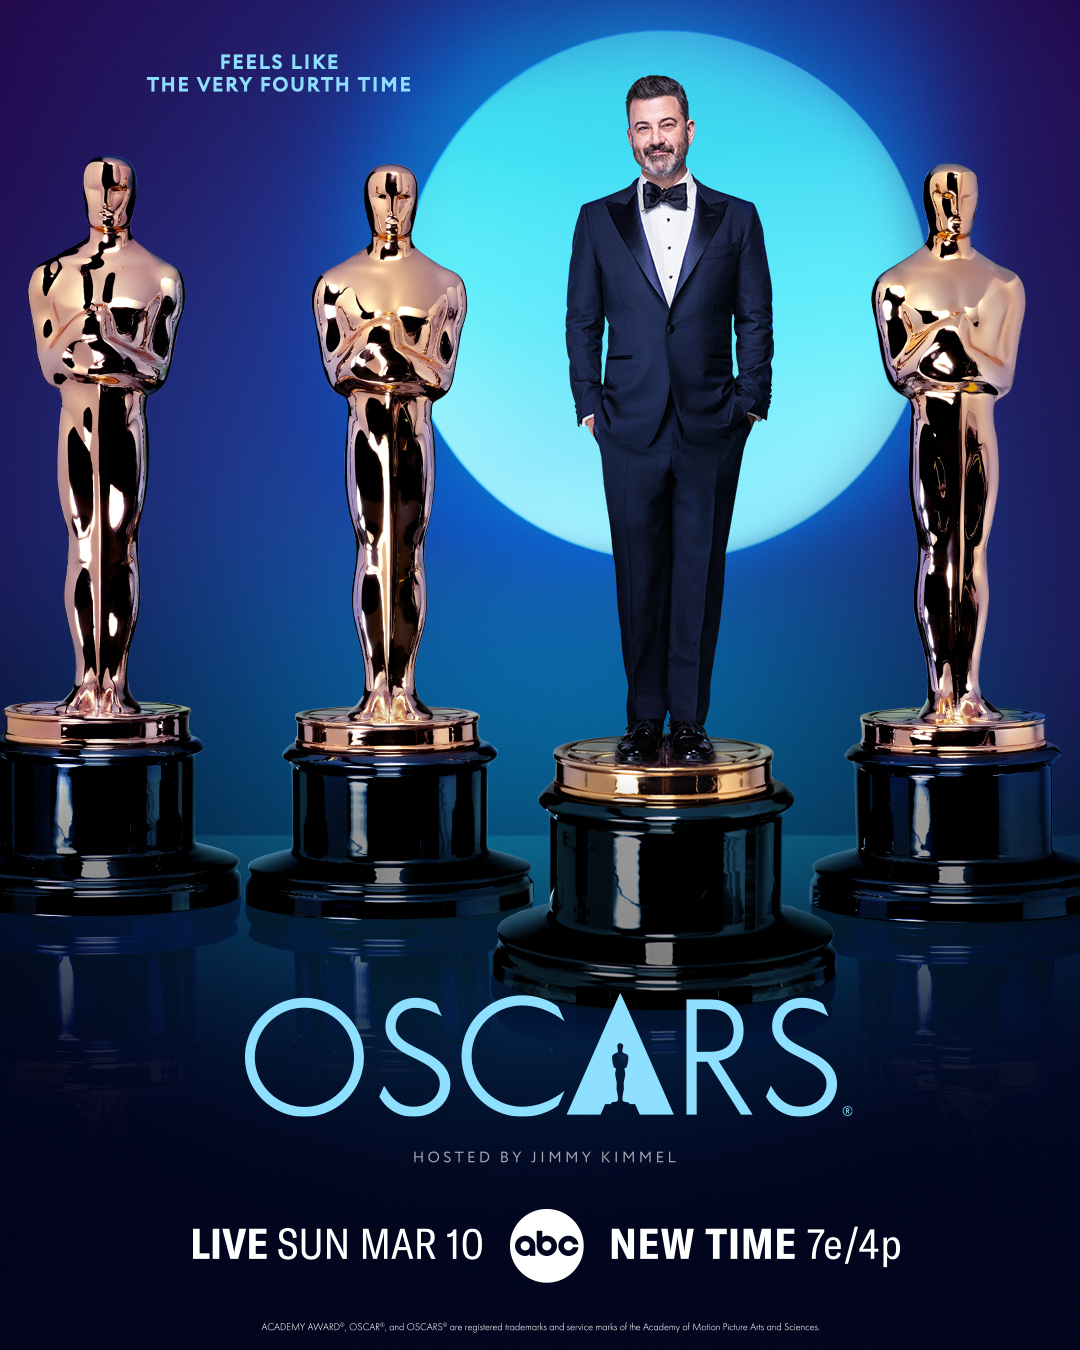 Jimmy Kimmel stands among Oscar statues for an Oscars event poster with event details